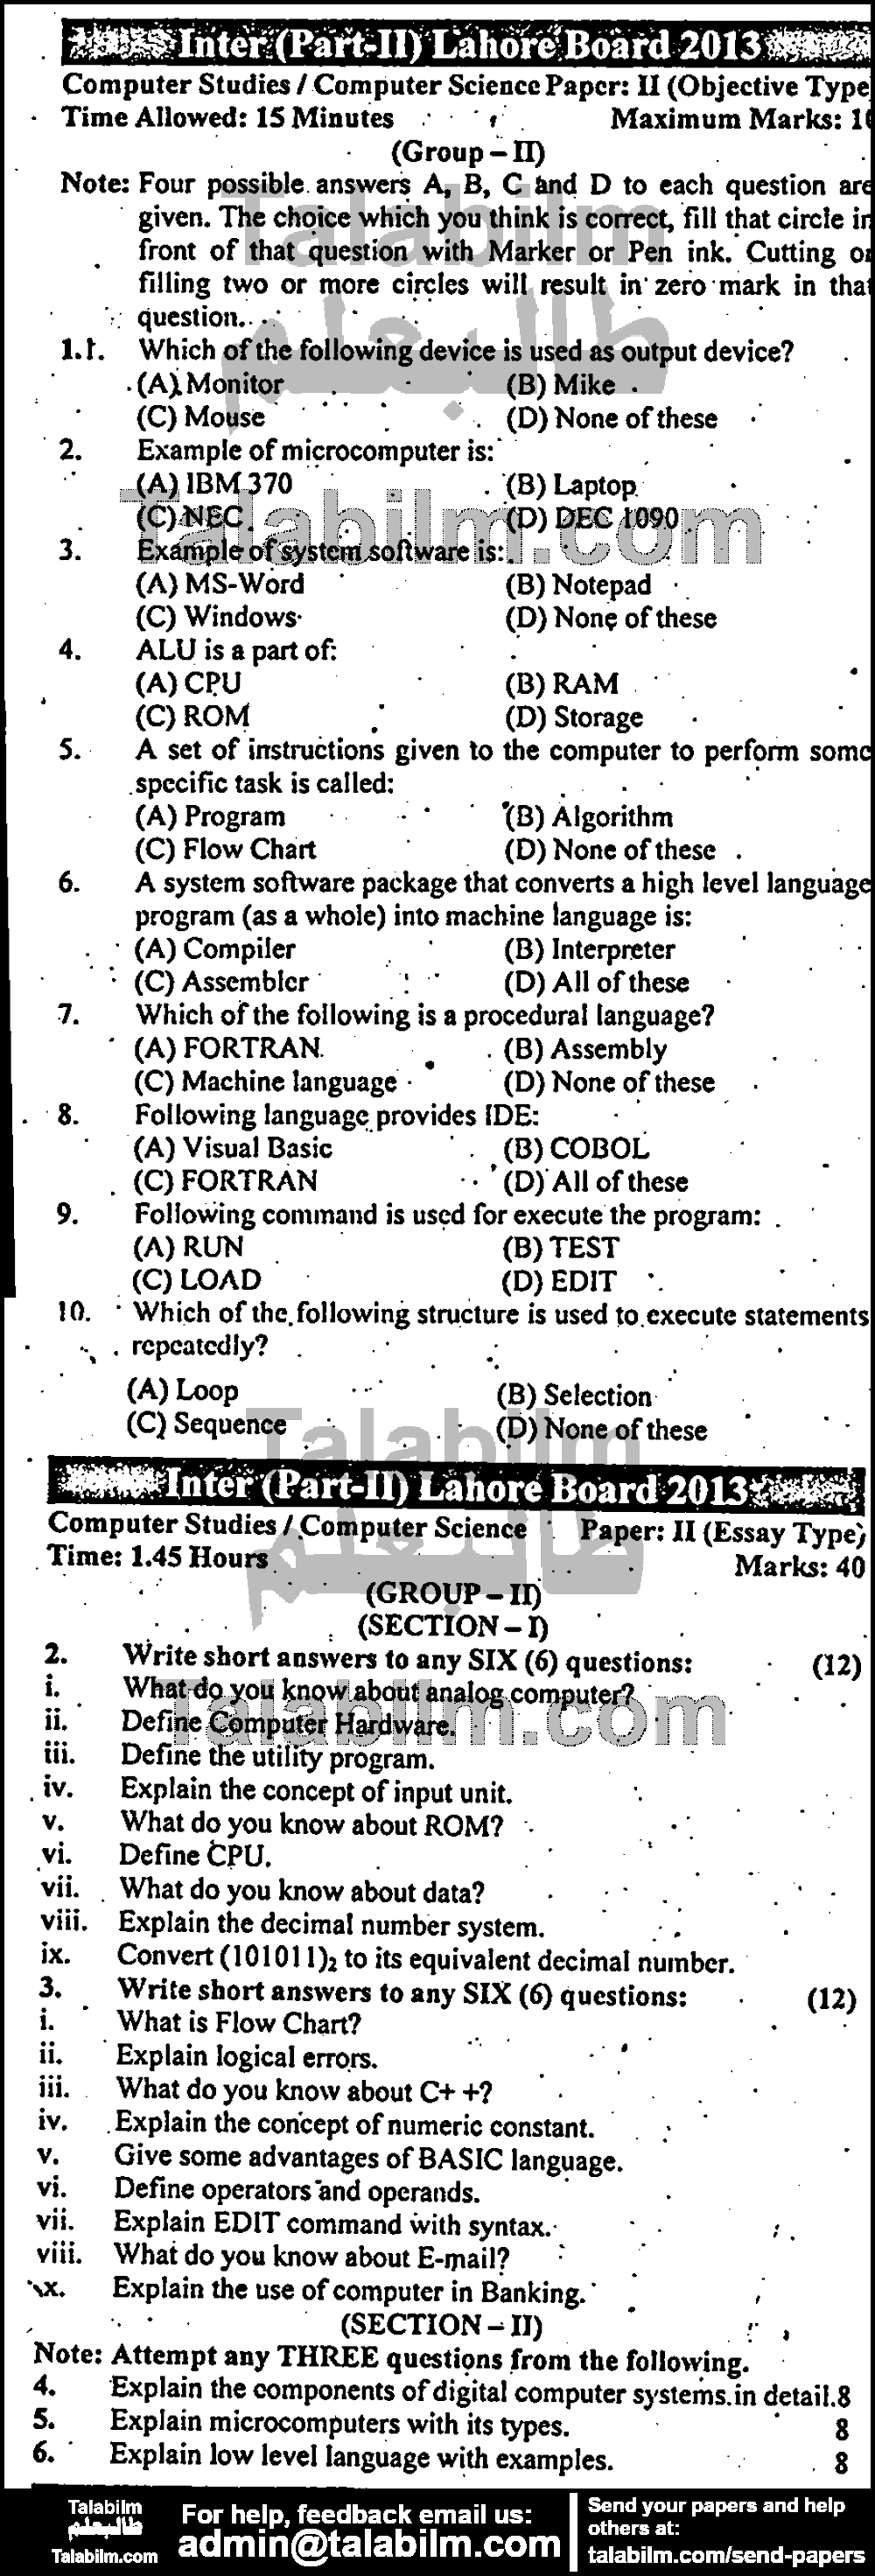 Computer Science 0 past paper for Group-II 2013